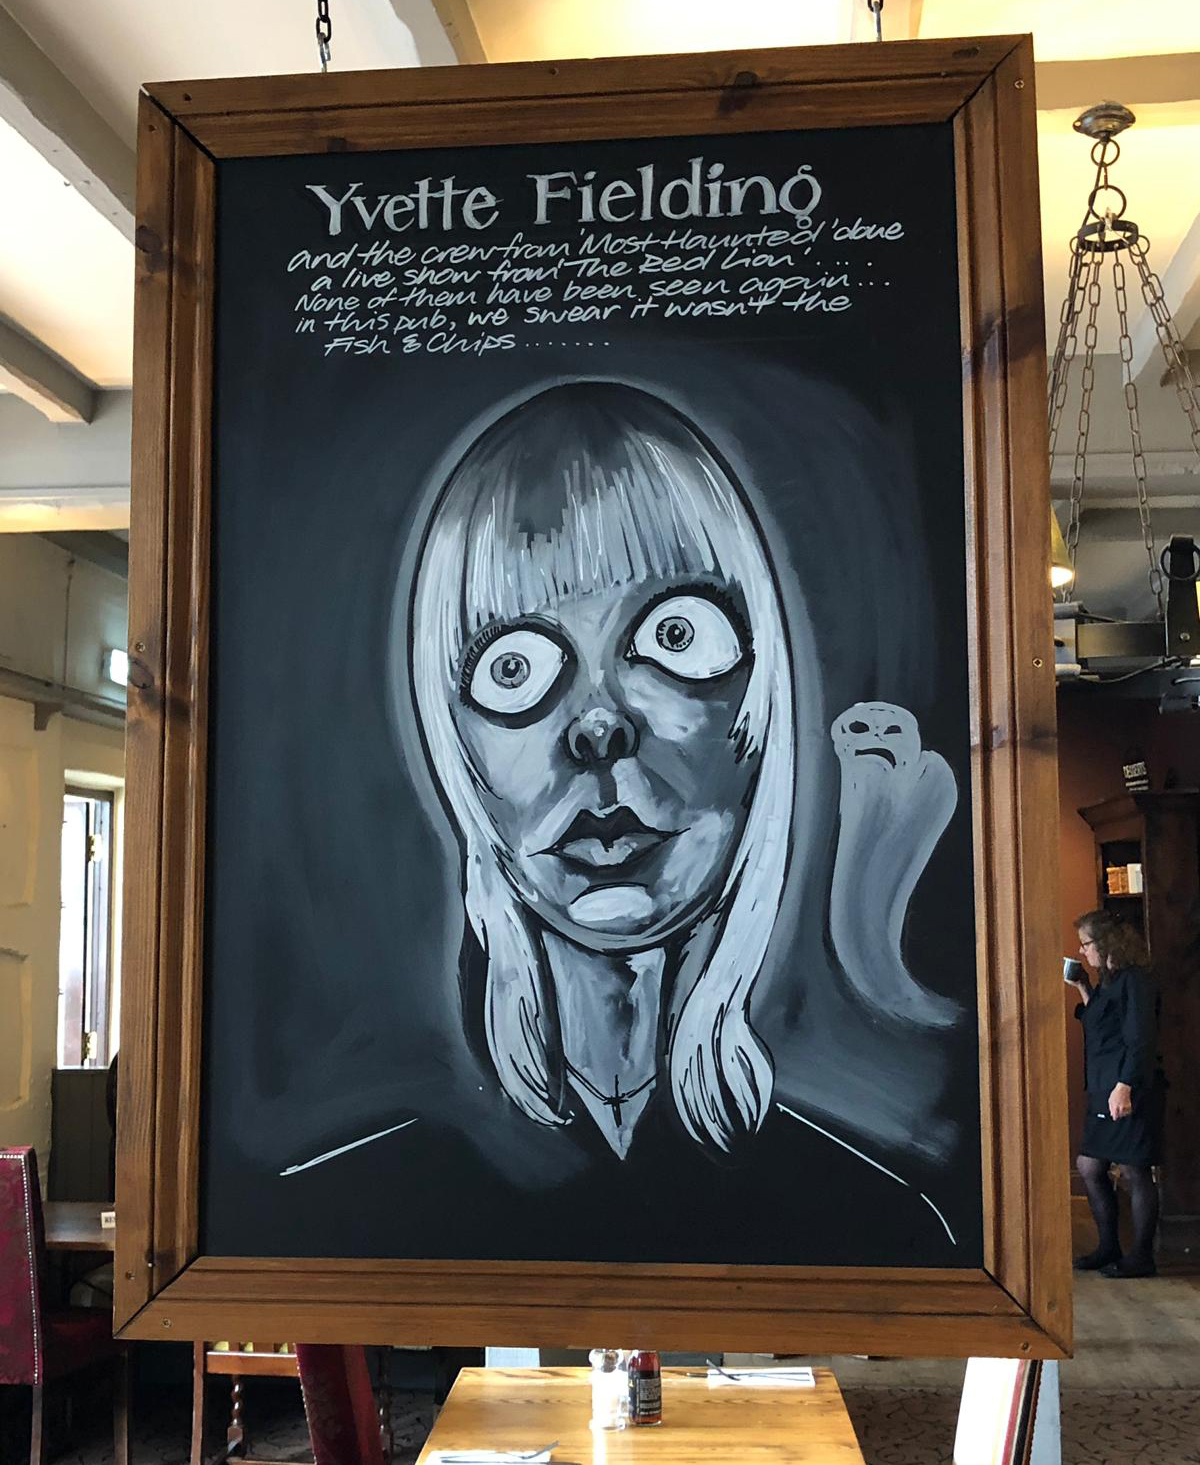 Yvette Fielding At The Red Lion, Avebury